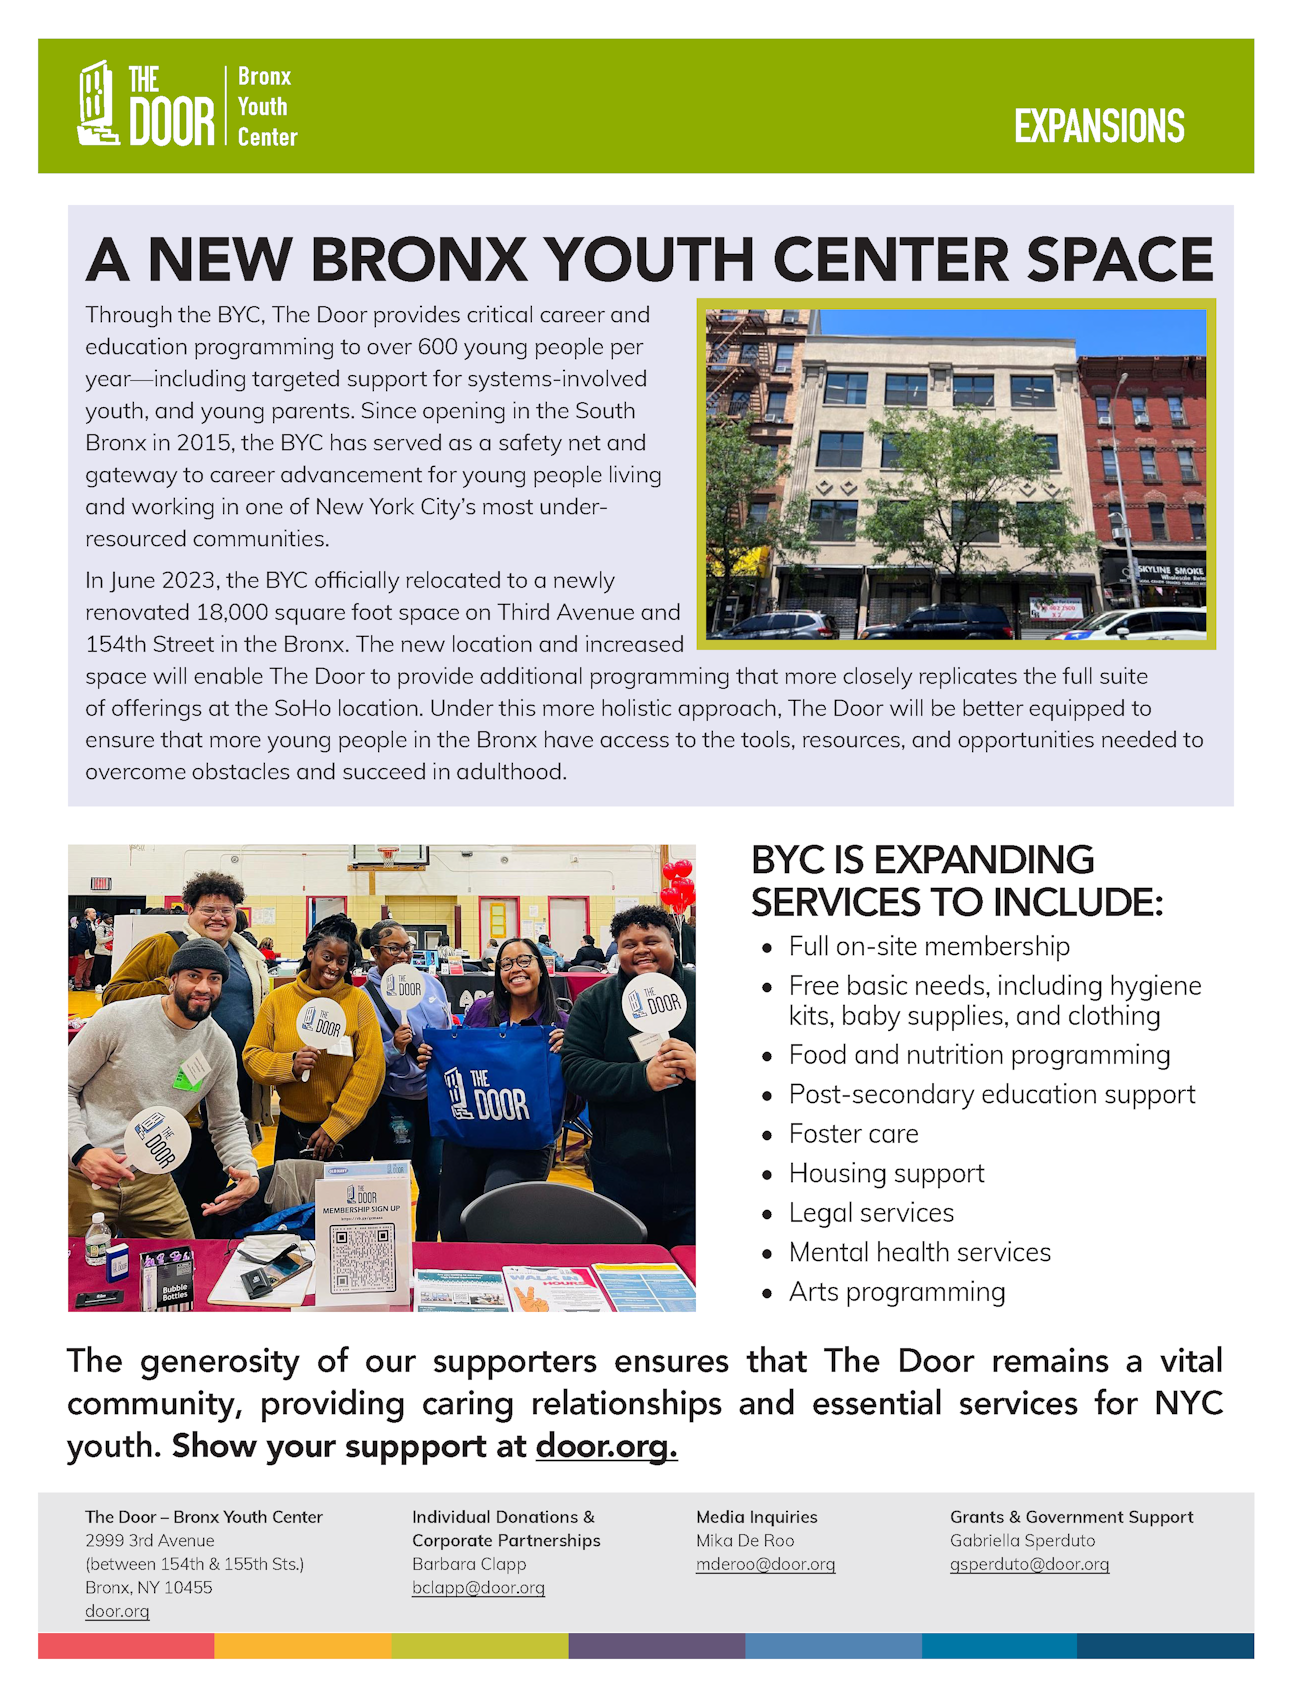 Bronx Youth Center expansions one-pager